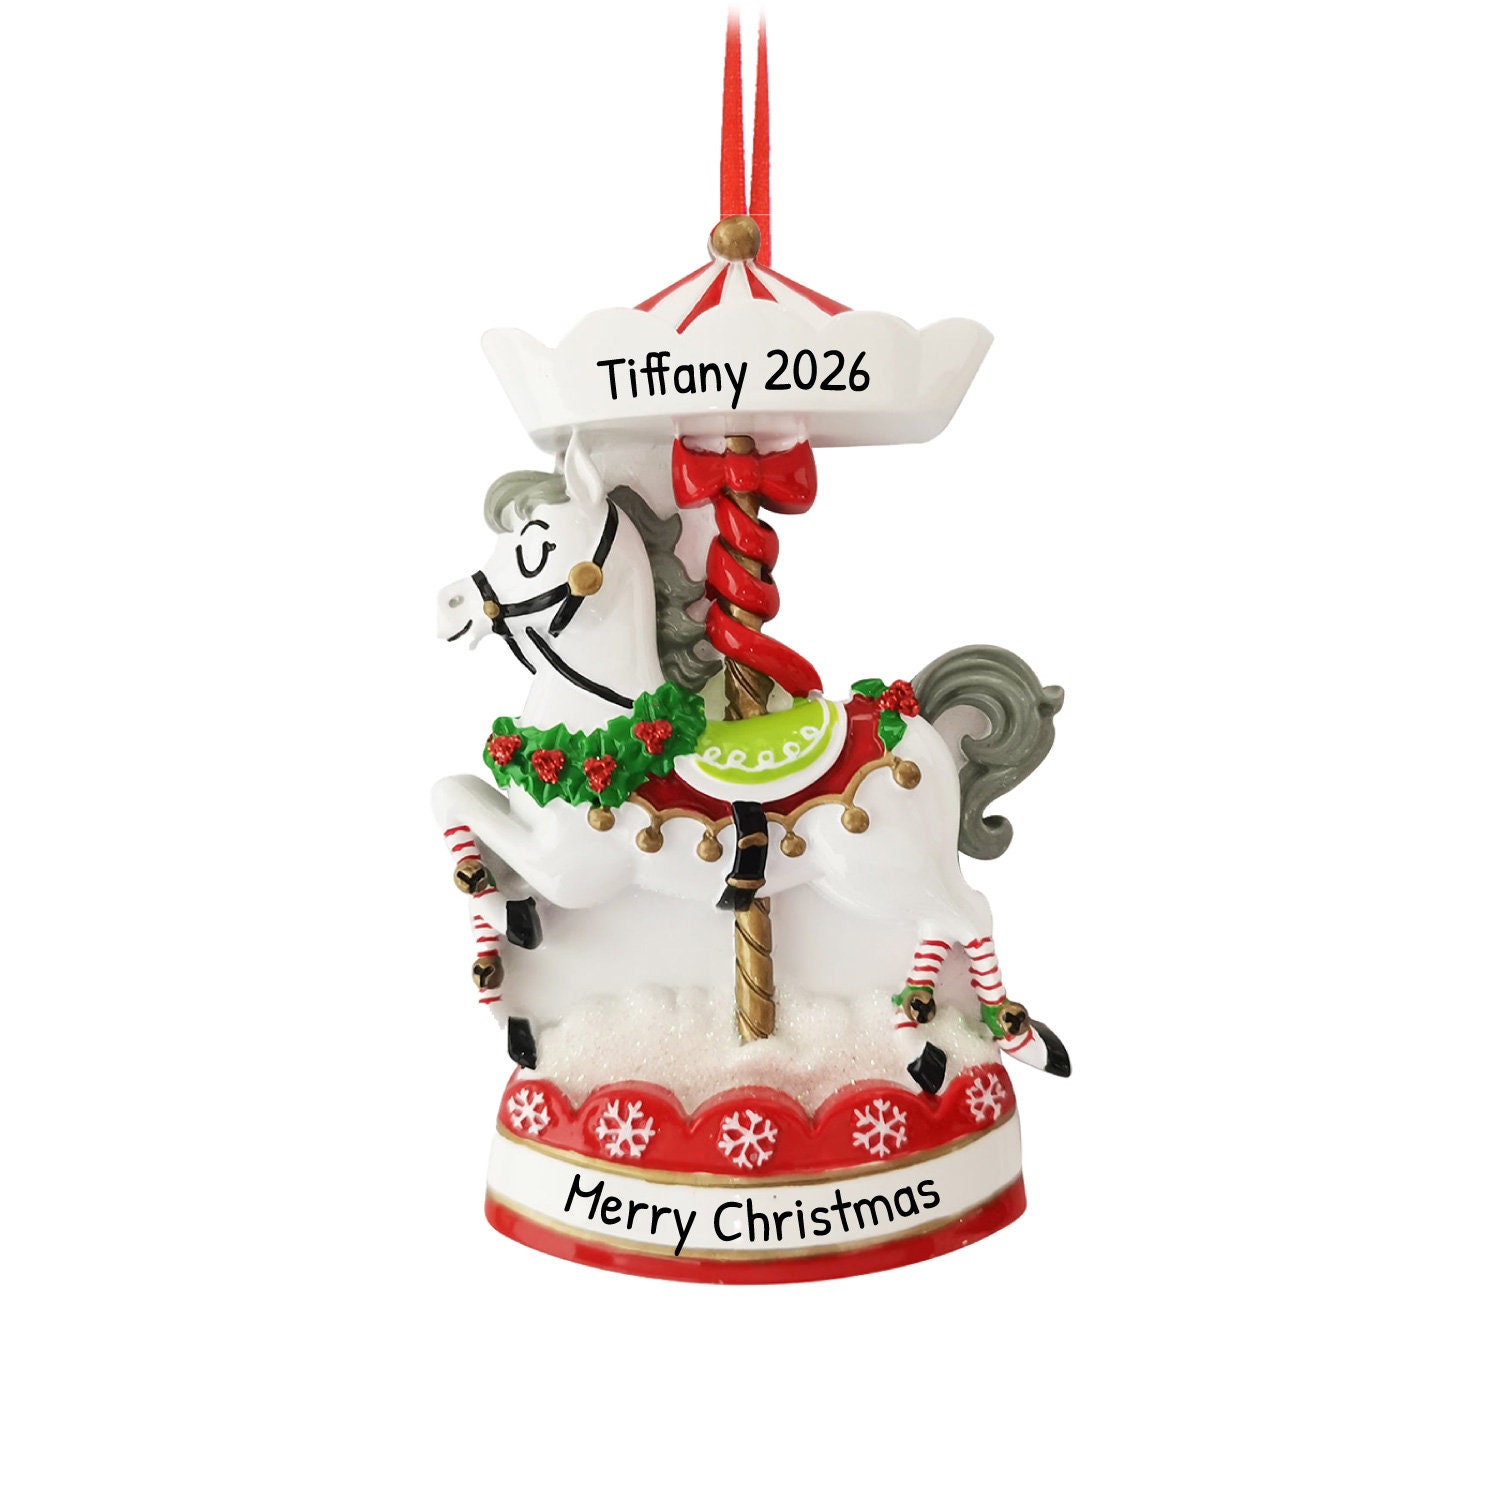 Personalized Christmas Merry Go Round Carousel Ornament - Carousel Horse Ornament, Carousel Animal - Free Customization with Gift Box